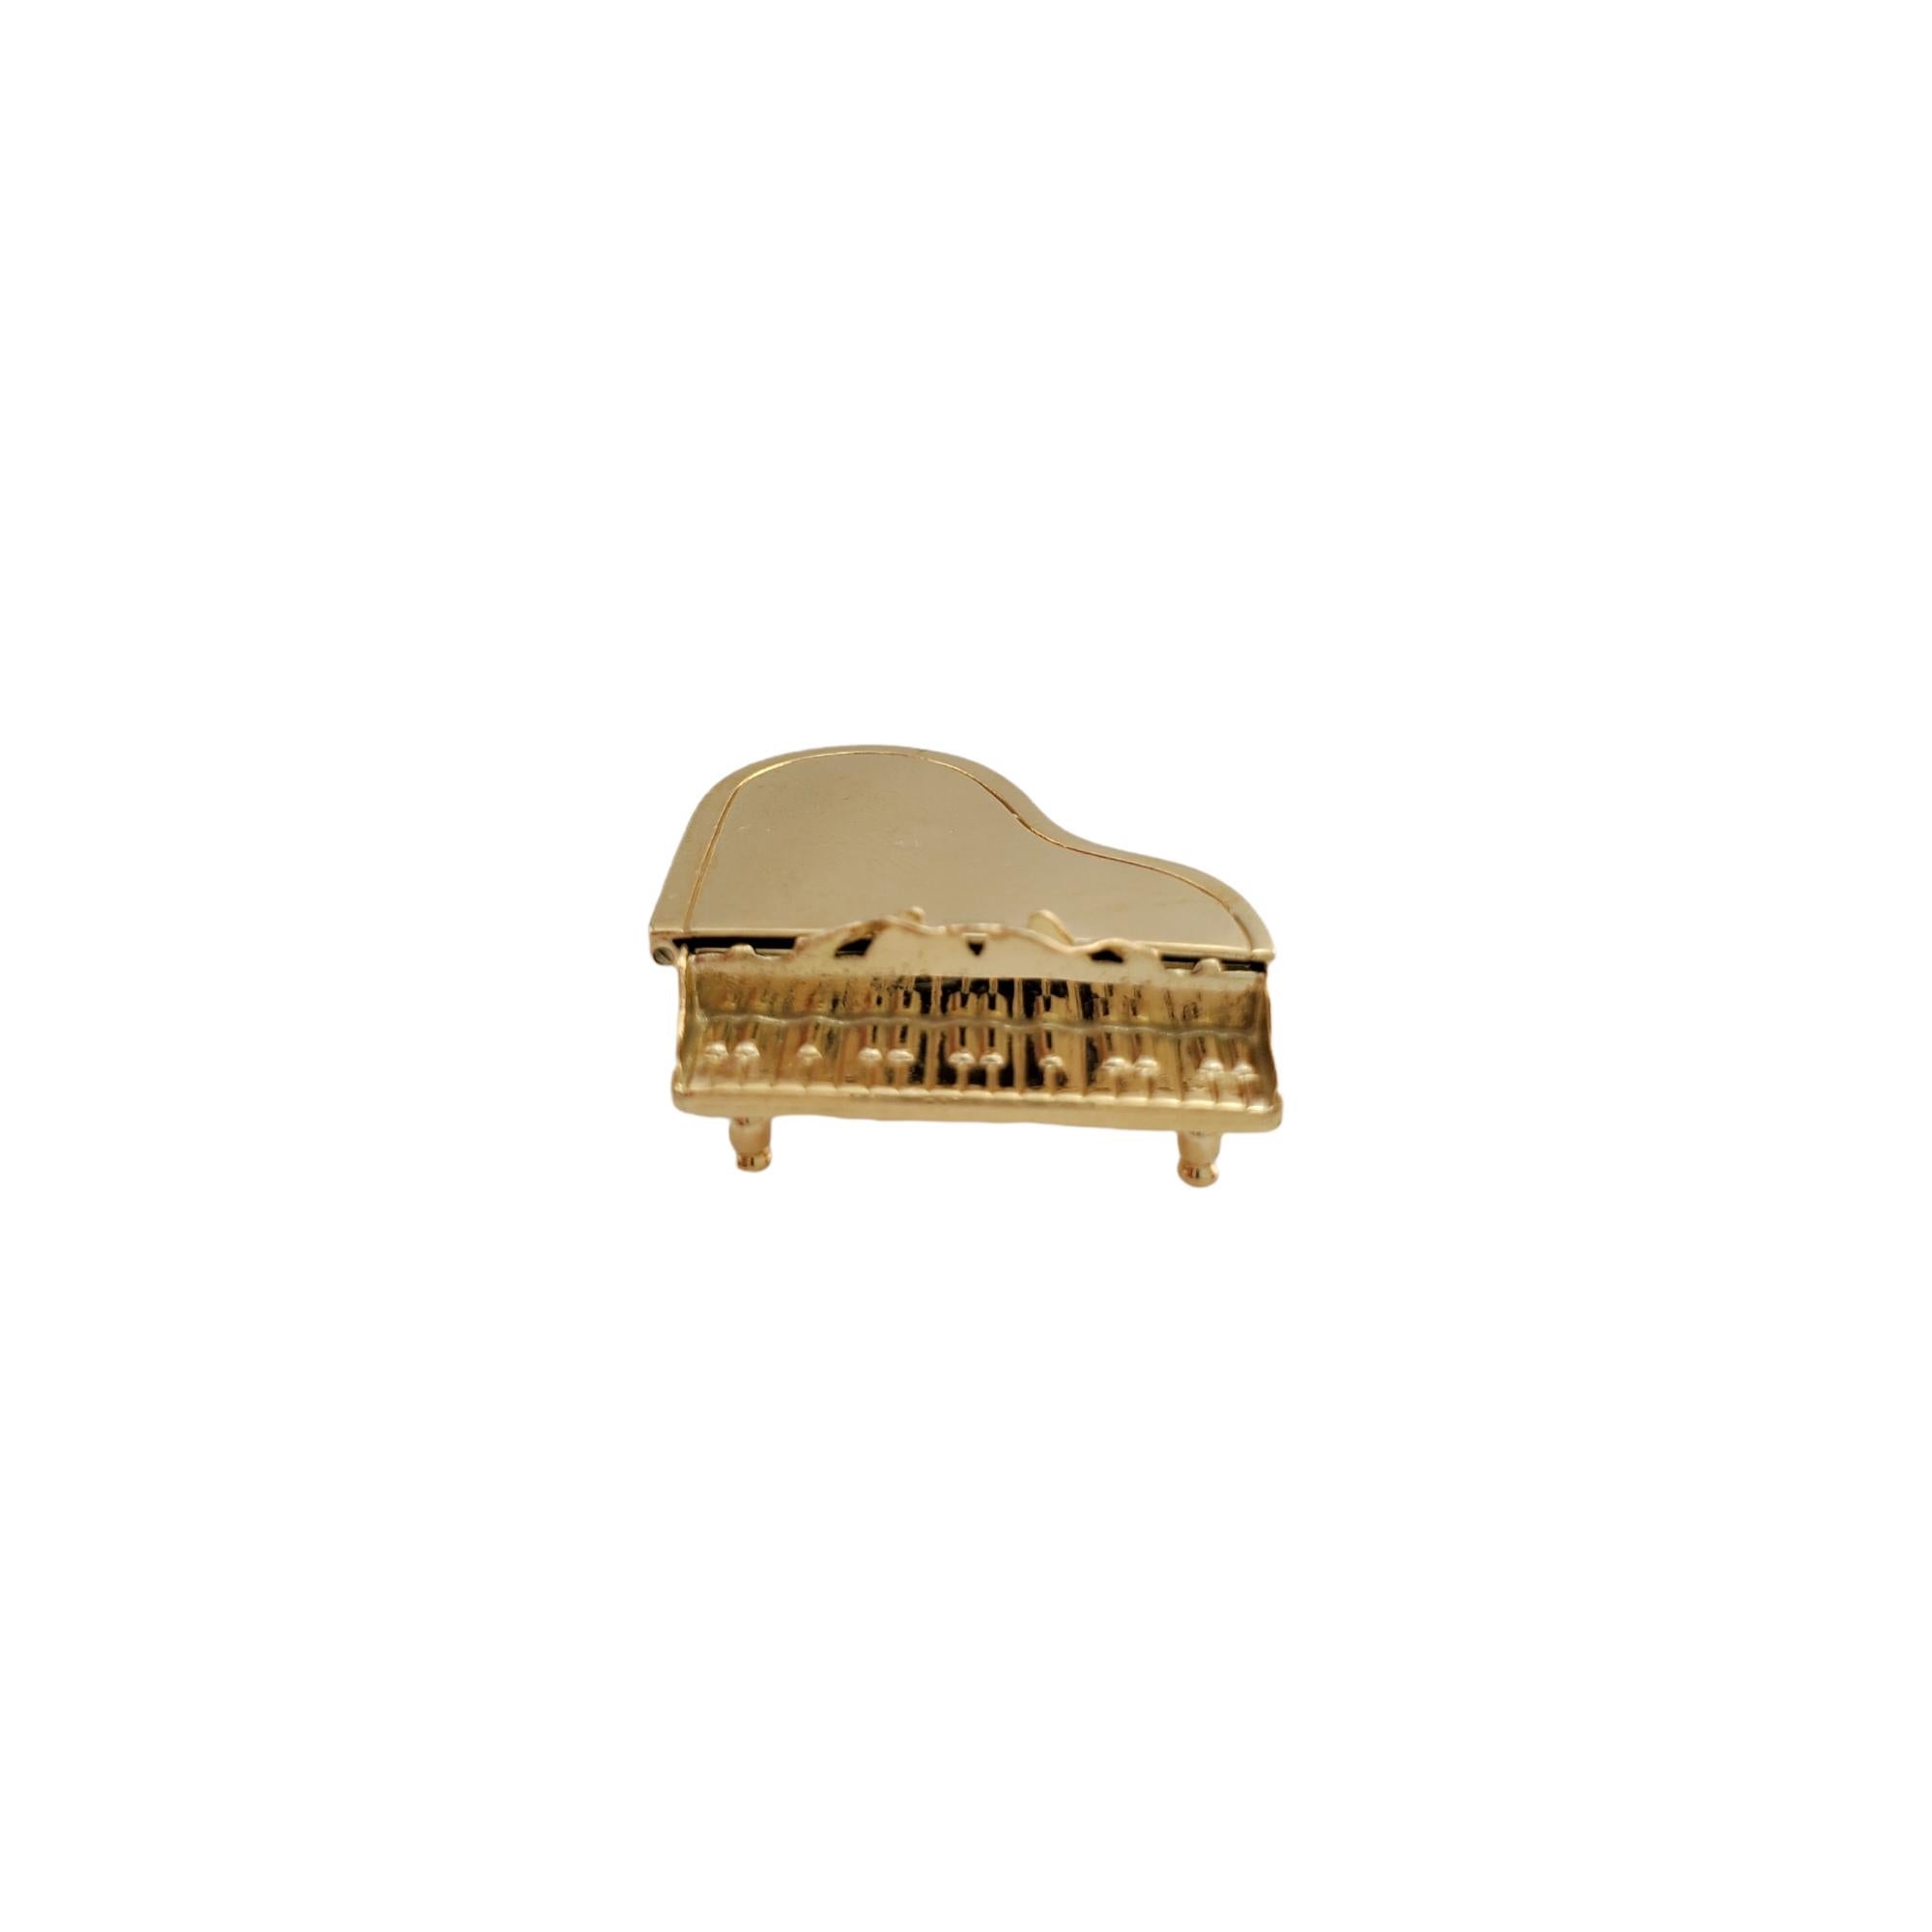 Vintage 14K Yellow Gold Grand Piano Charm 

You'll love this beautiful yellow gold grand piano charm! 

Size: 4.58mm X 21.36mm

Weight: 6.5 gr /  4.1dwt

Hallmark: 14K

Very good condition, professionally polished.

Will come packaged in a gift box